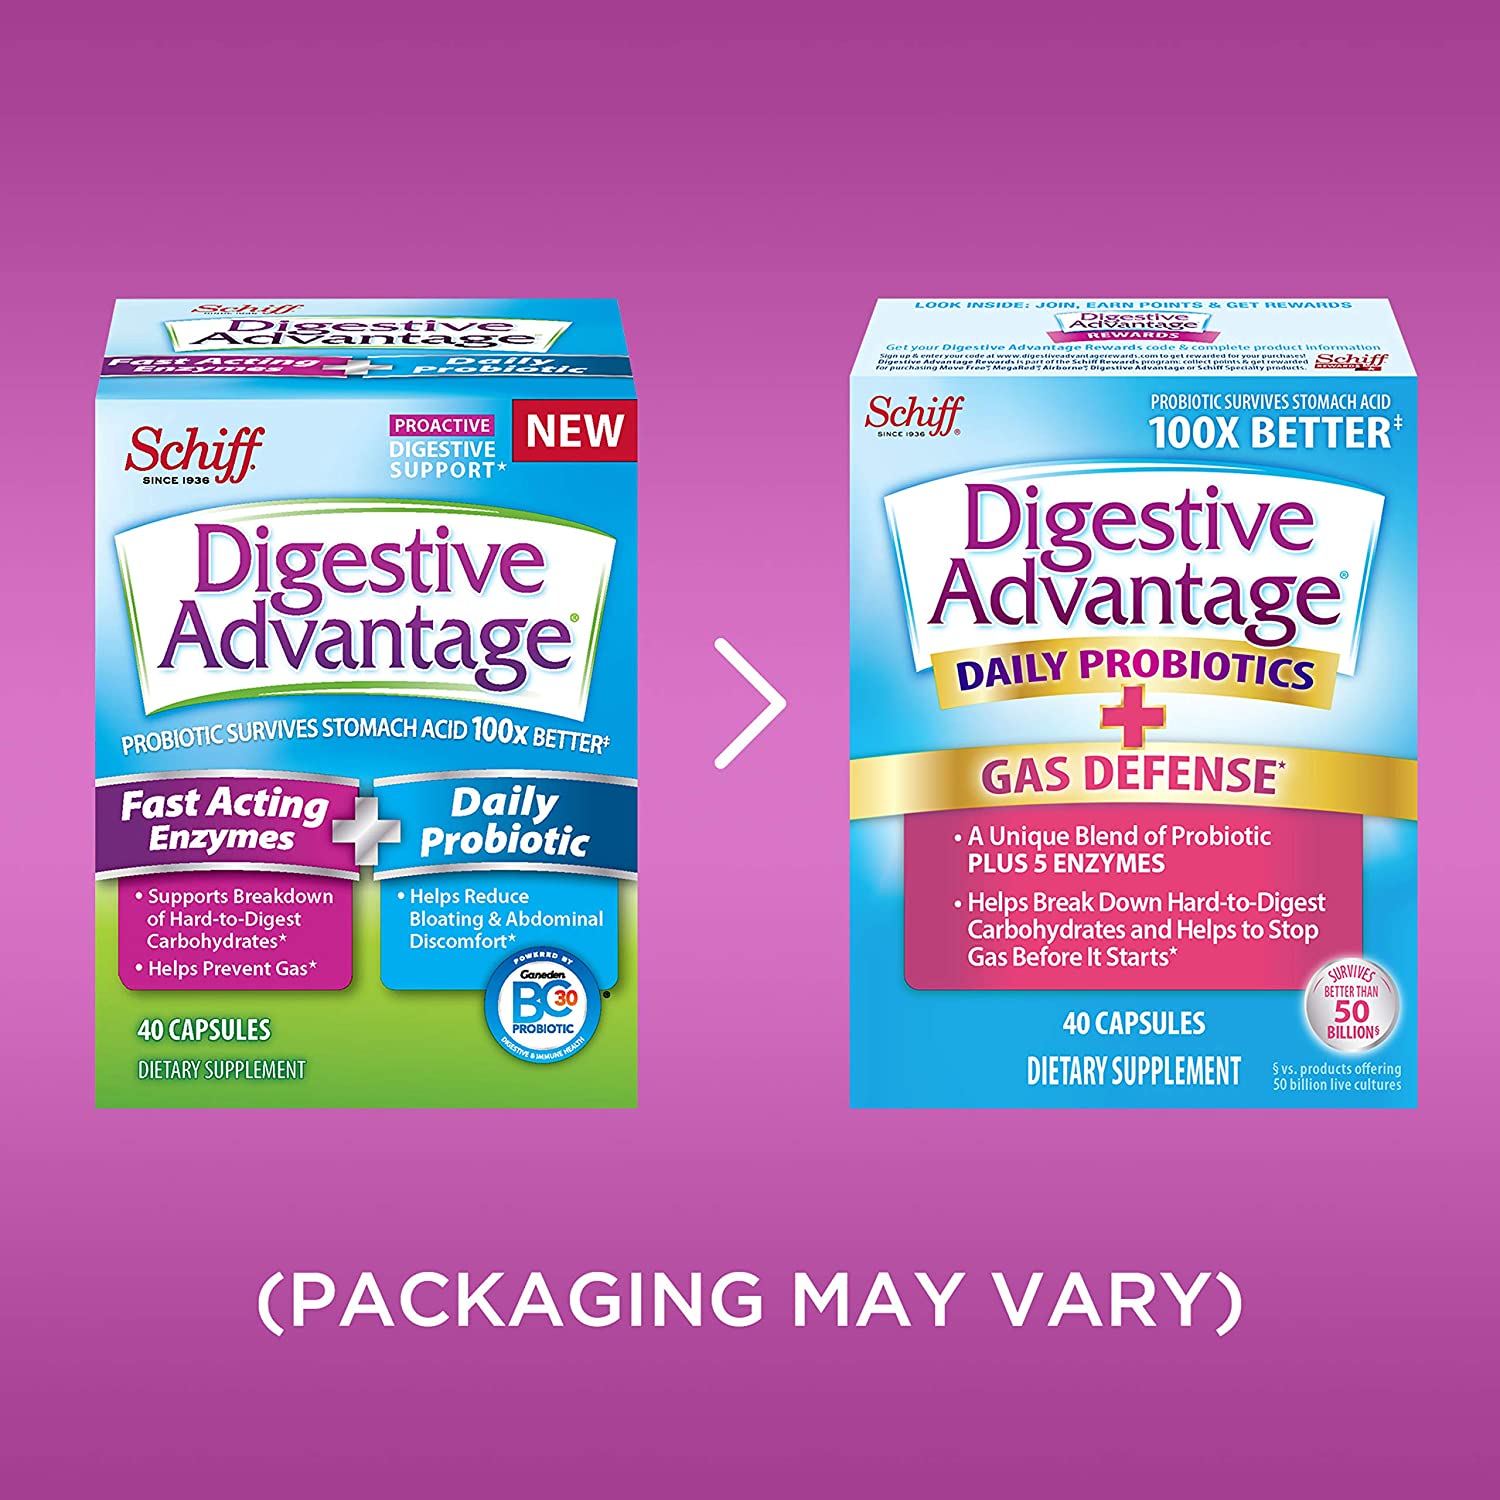 Digestive Advantage Fast Acting Enzymes + Daily Probiotic, 40 Capsules (Pack of 2) - image 2 of 7